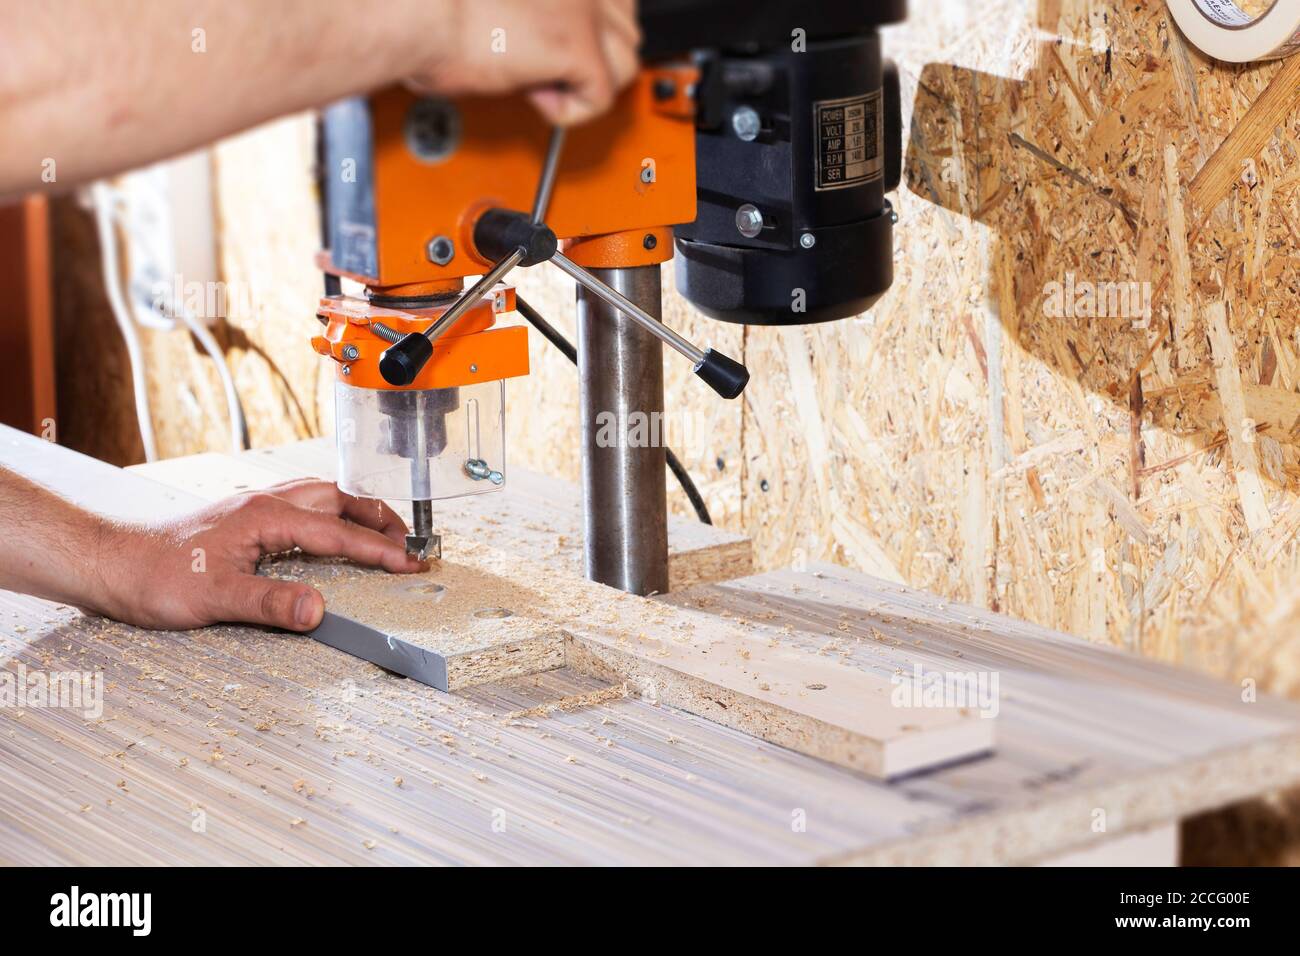 Drill in the drilling machine, making furniture Stock Photo